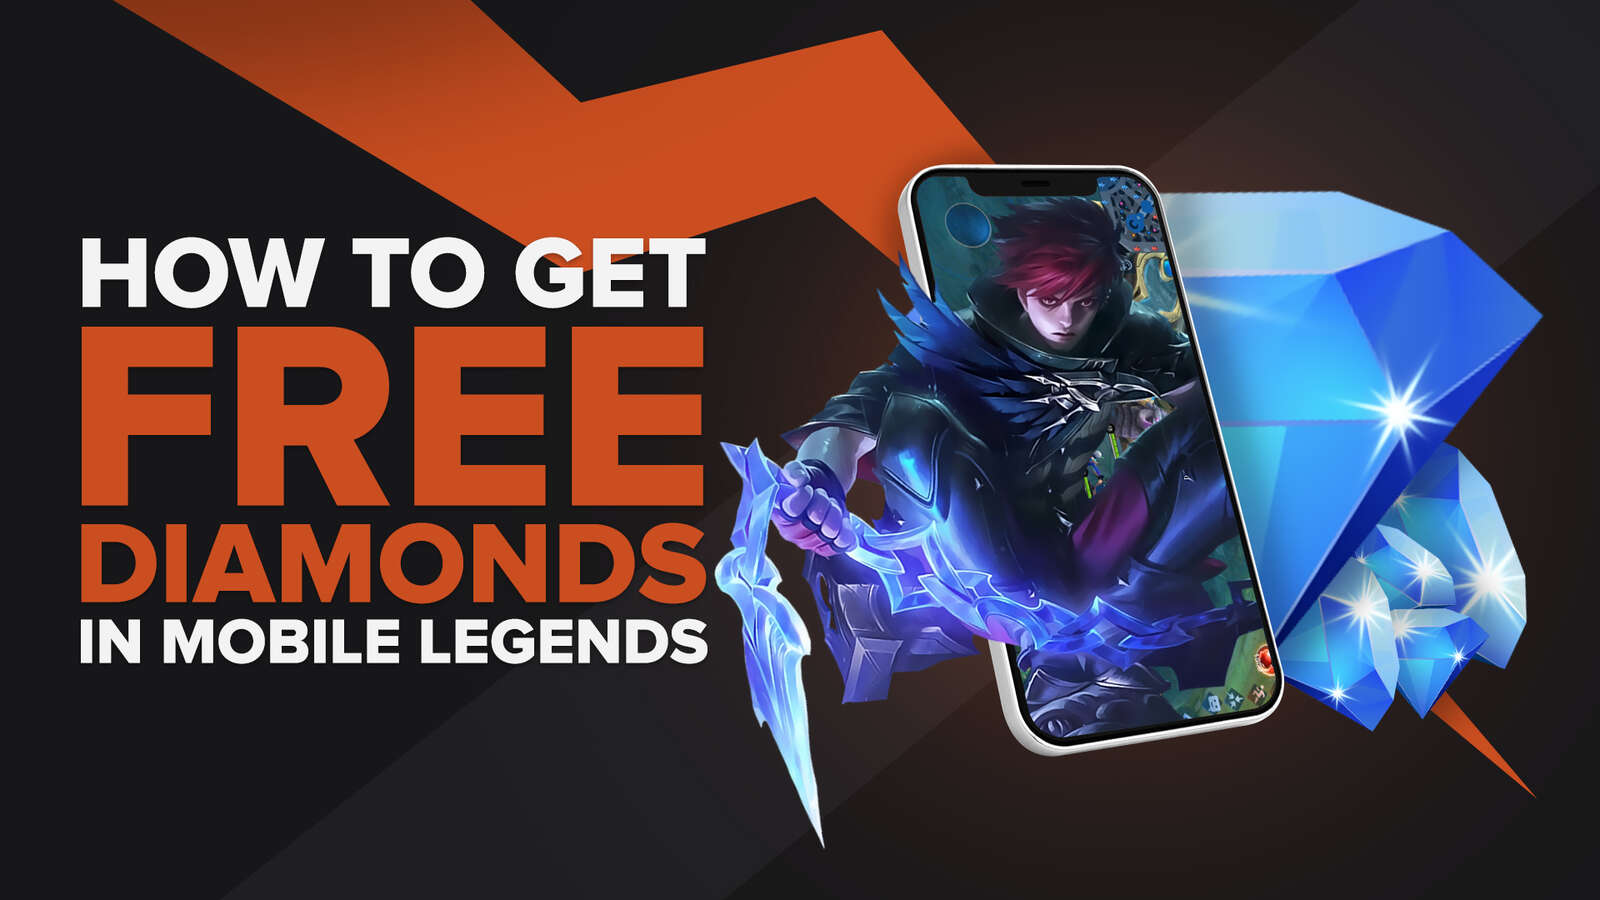 How To Get Diamonds In Mobile Legends For Free? (4 Legit Ways)